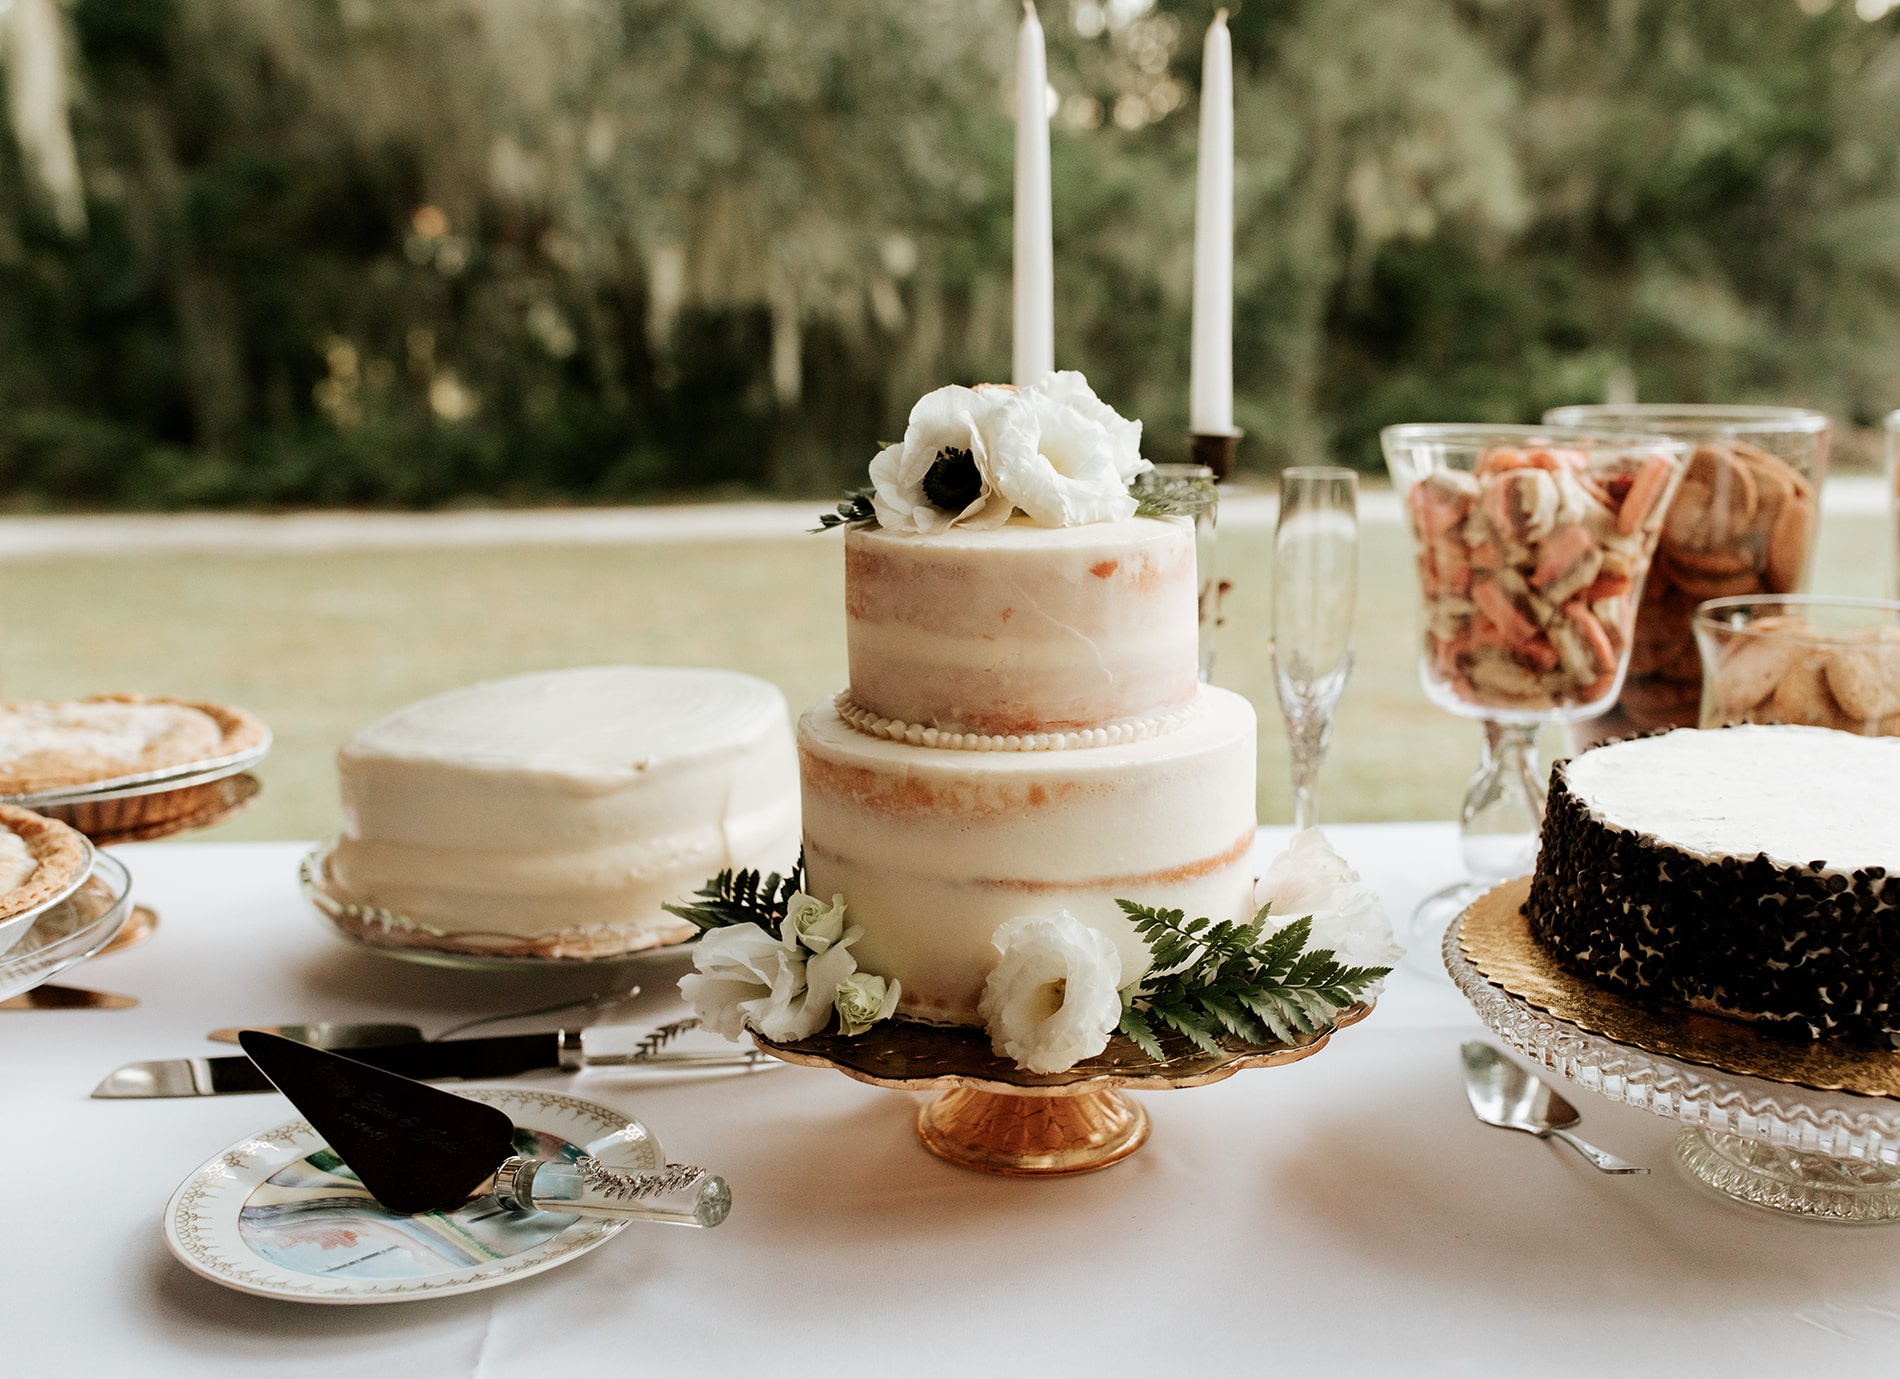 lowcountry-kitchen-catering-beaufort-sc-mary-grace-and-judd-kennedy-wedding-ceremony-cakes-min.jpg